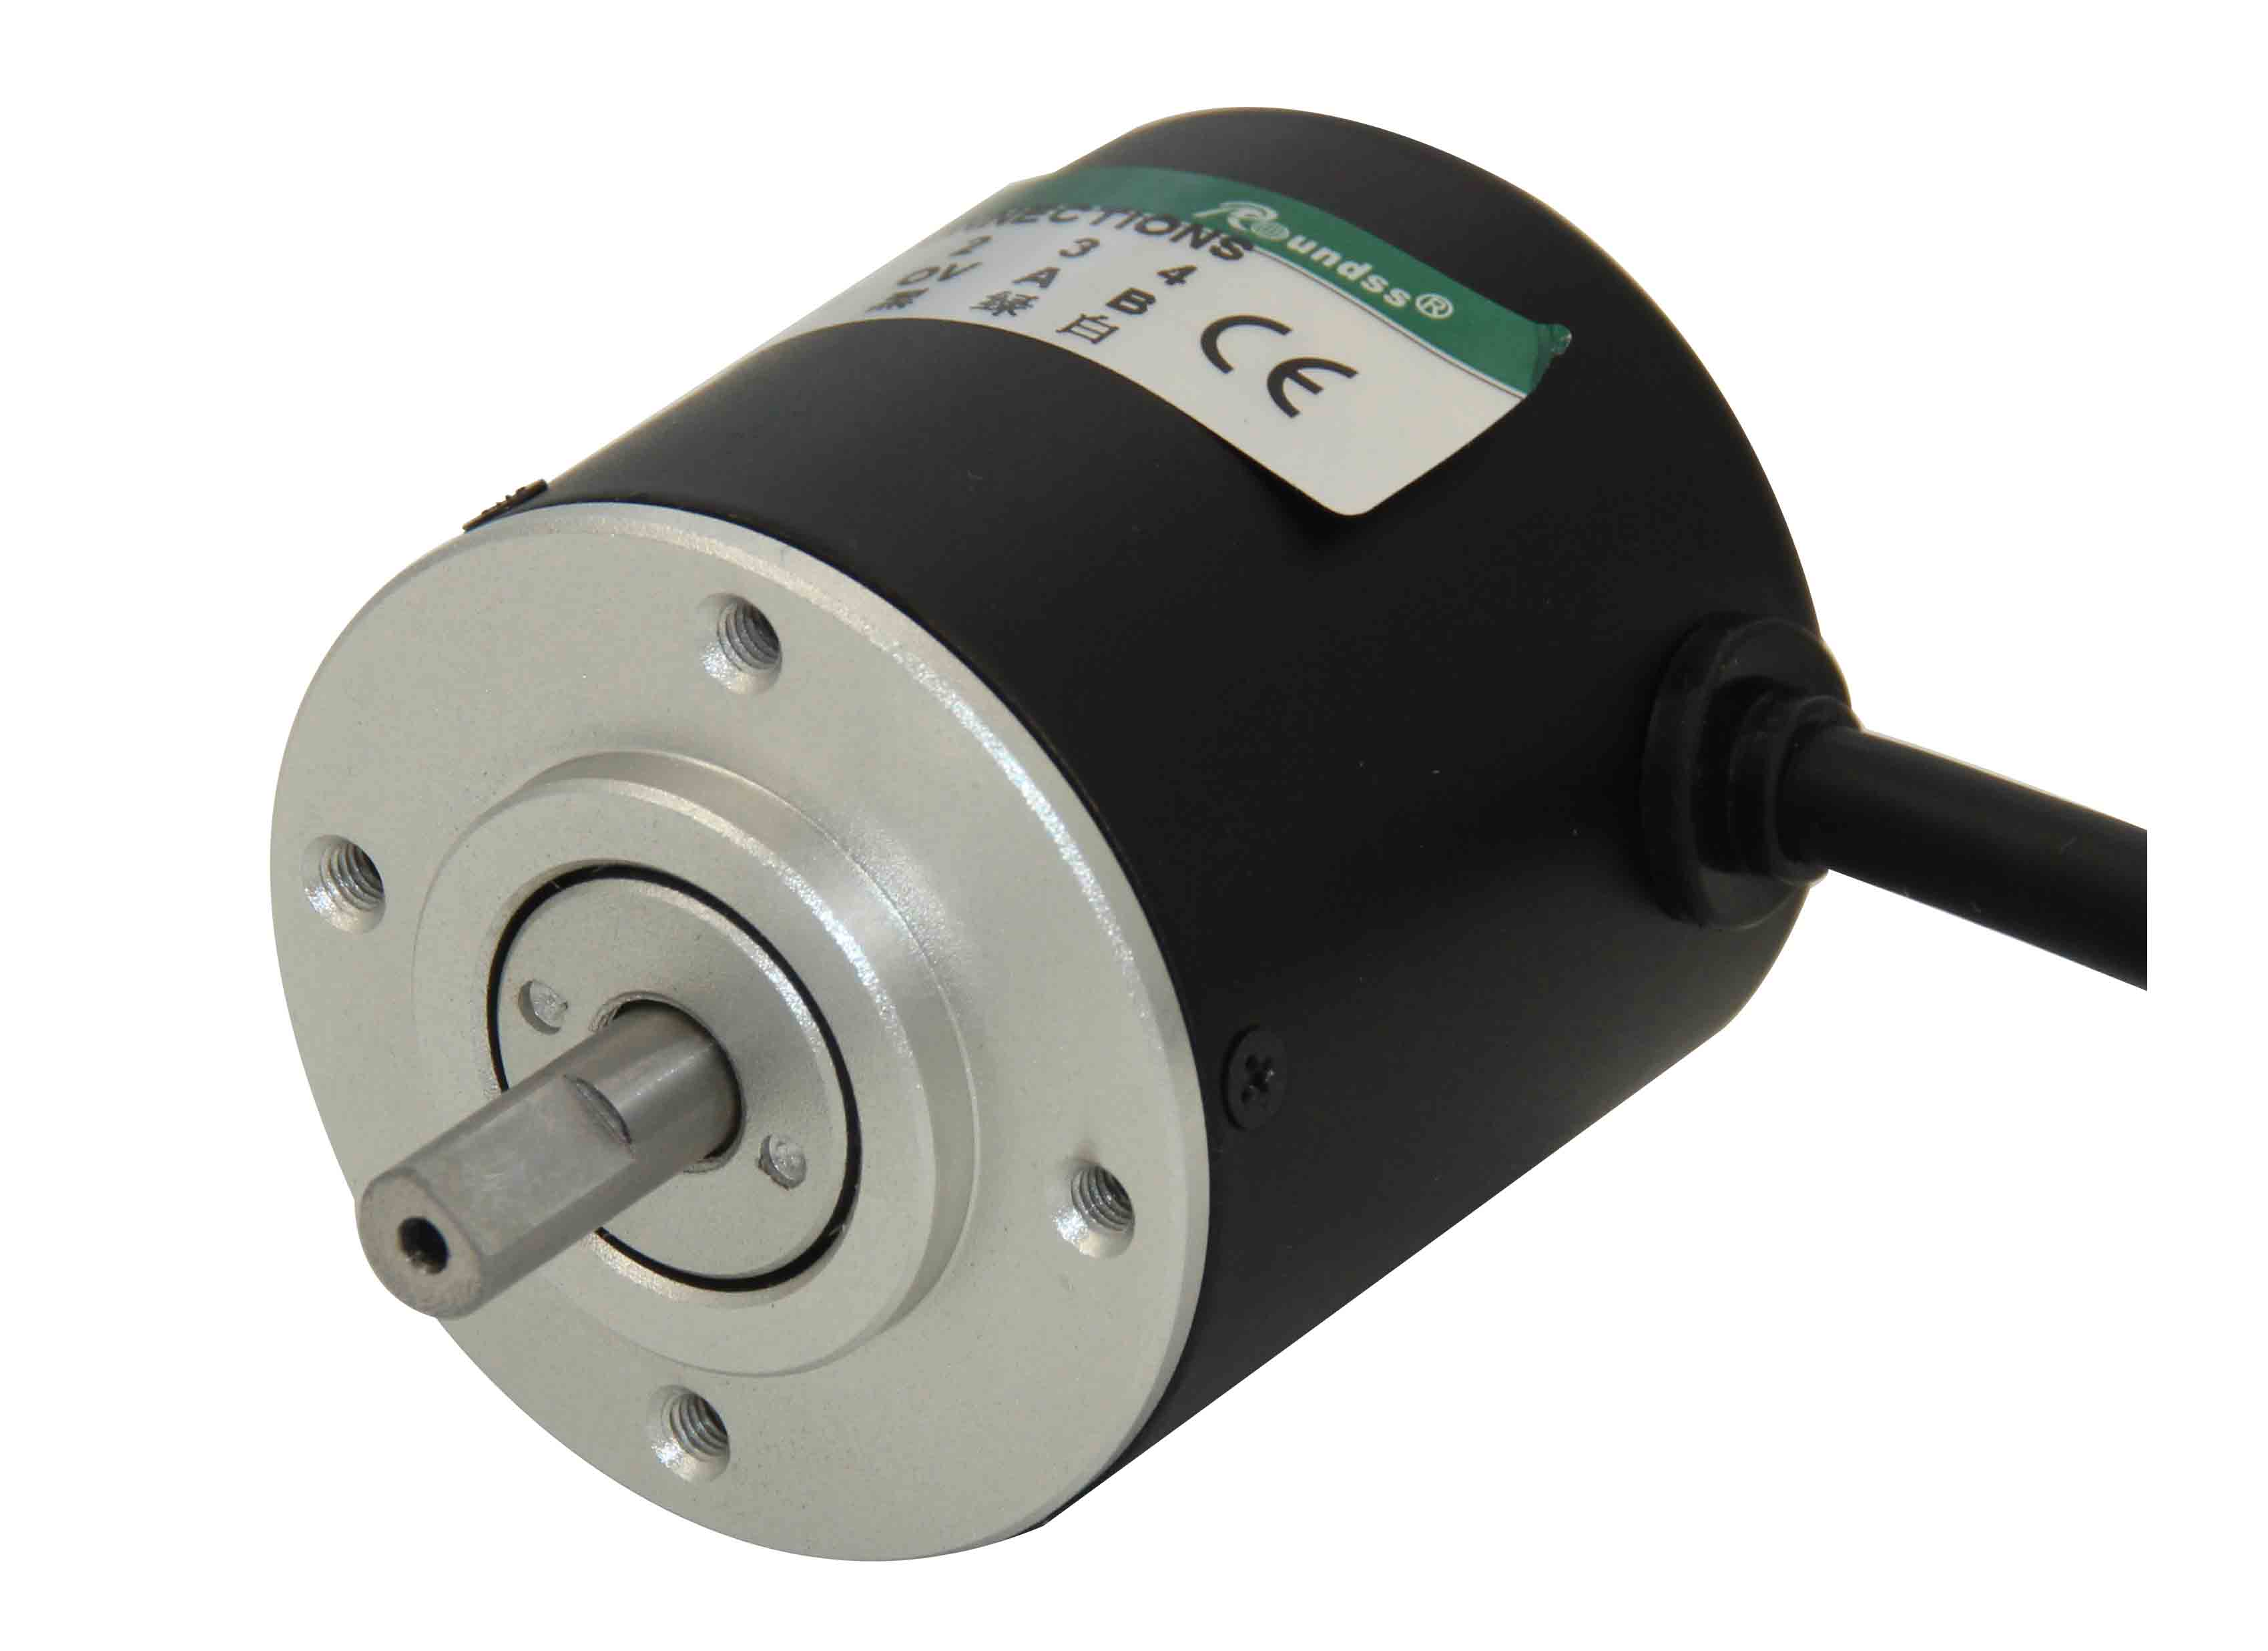 Absolute Encoder_Nonmagnetic Absolute Encoder